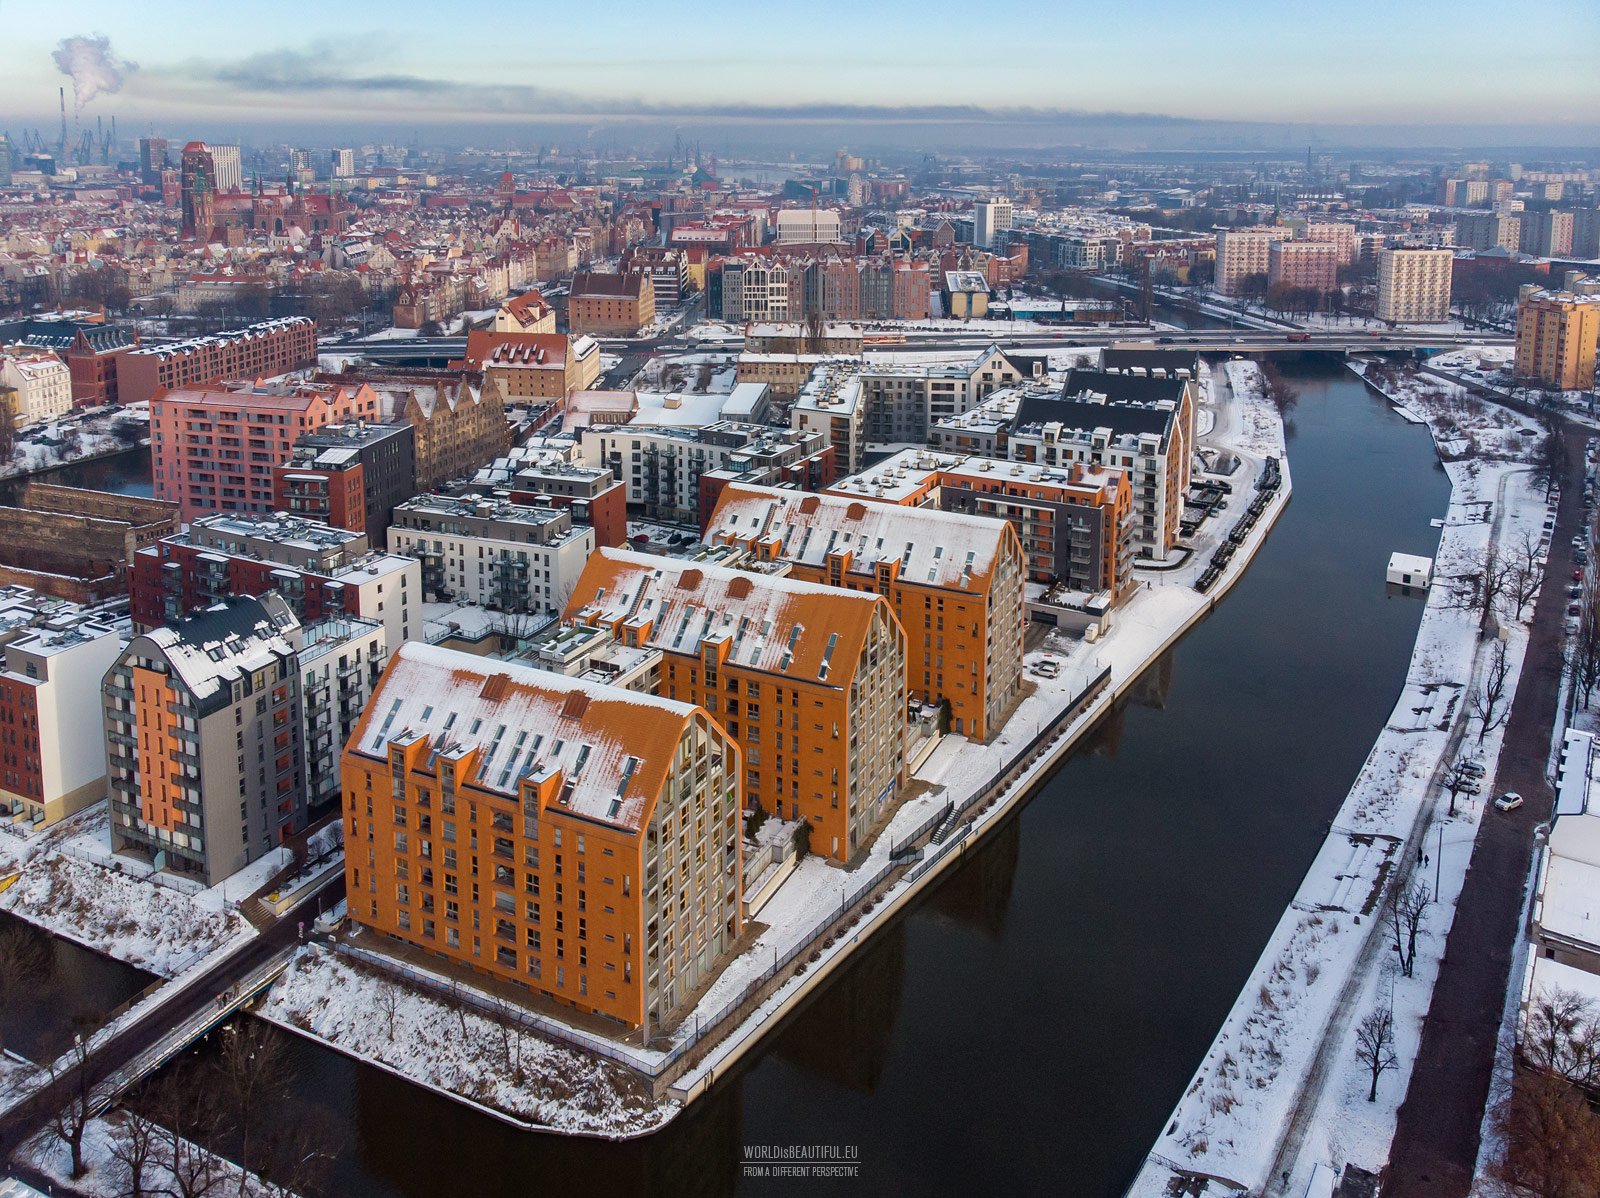 Apartment buildings and hotels in Gdańsk